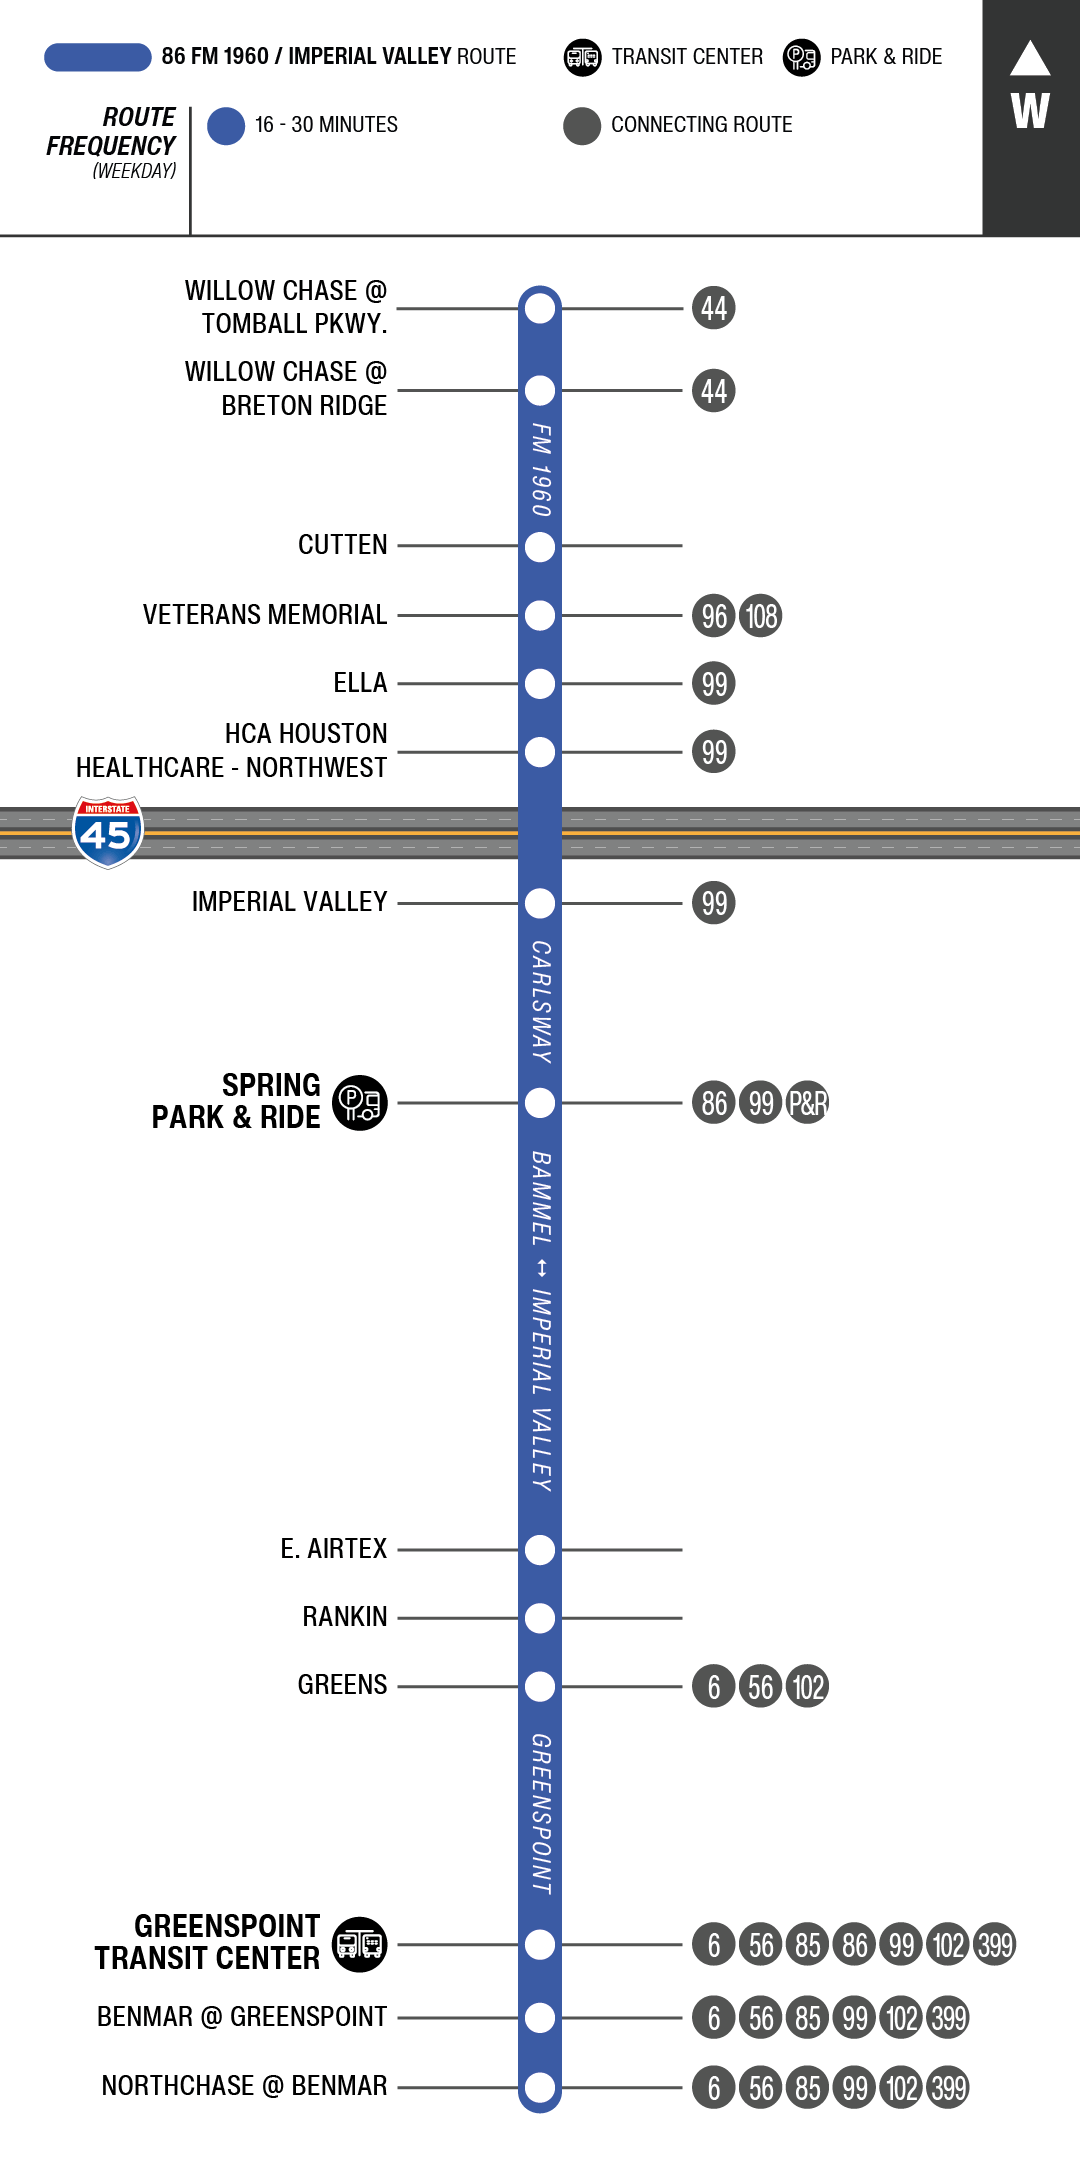 Route map for 86 FM 1960 / Imperial Valley  bus